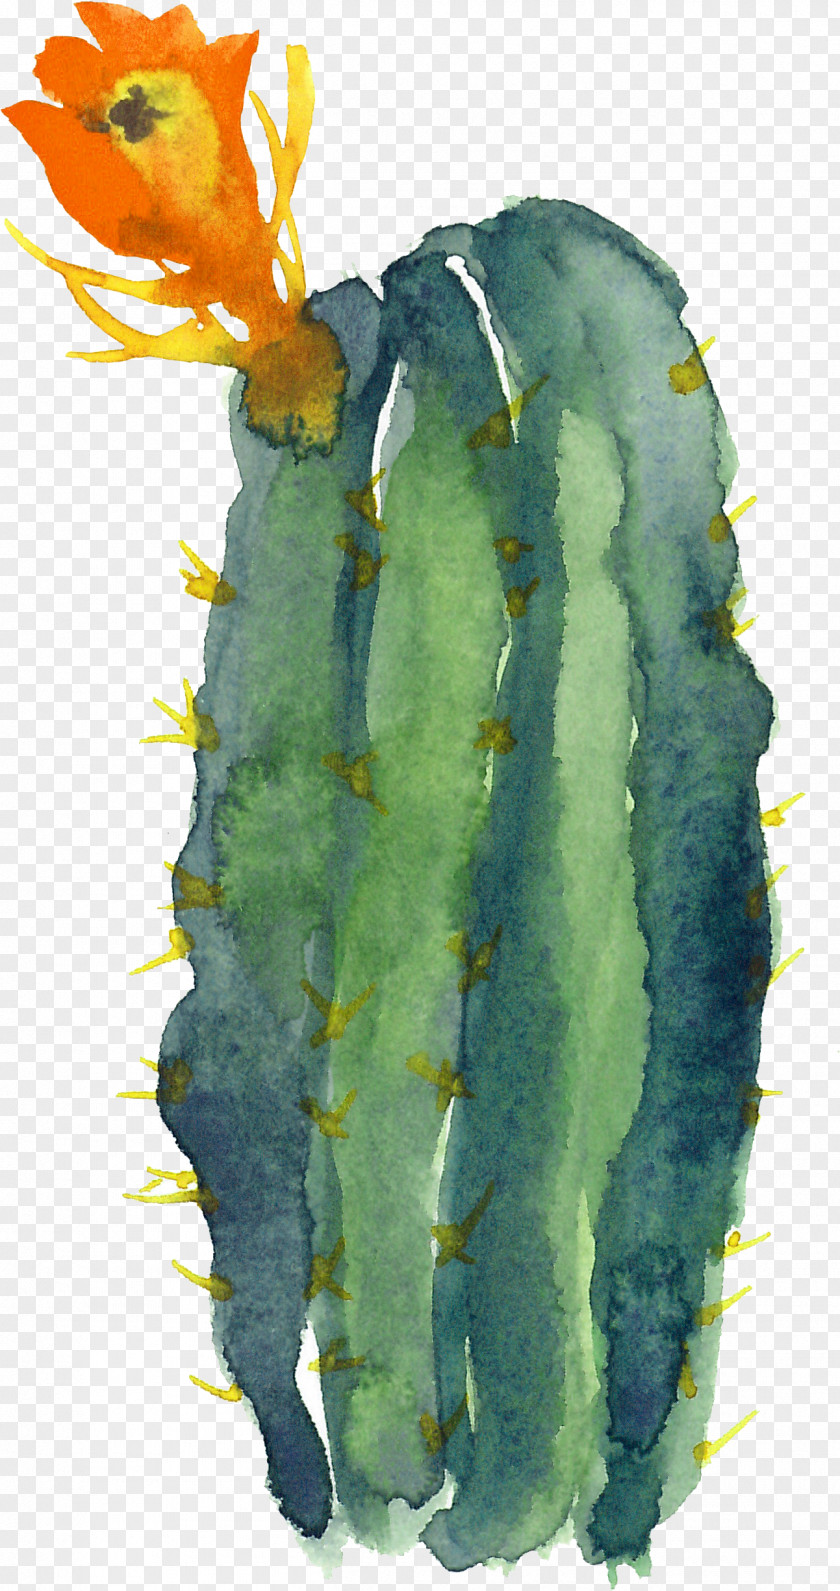 Cactus Cactaceae Modern Watercolor: A Playful And Contemporary Exploration Of Watercolor Painting PNG